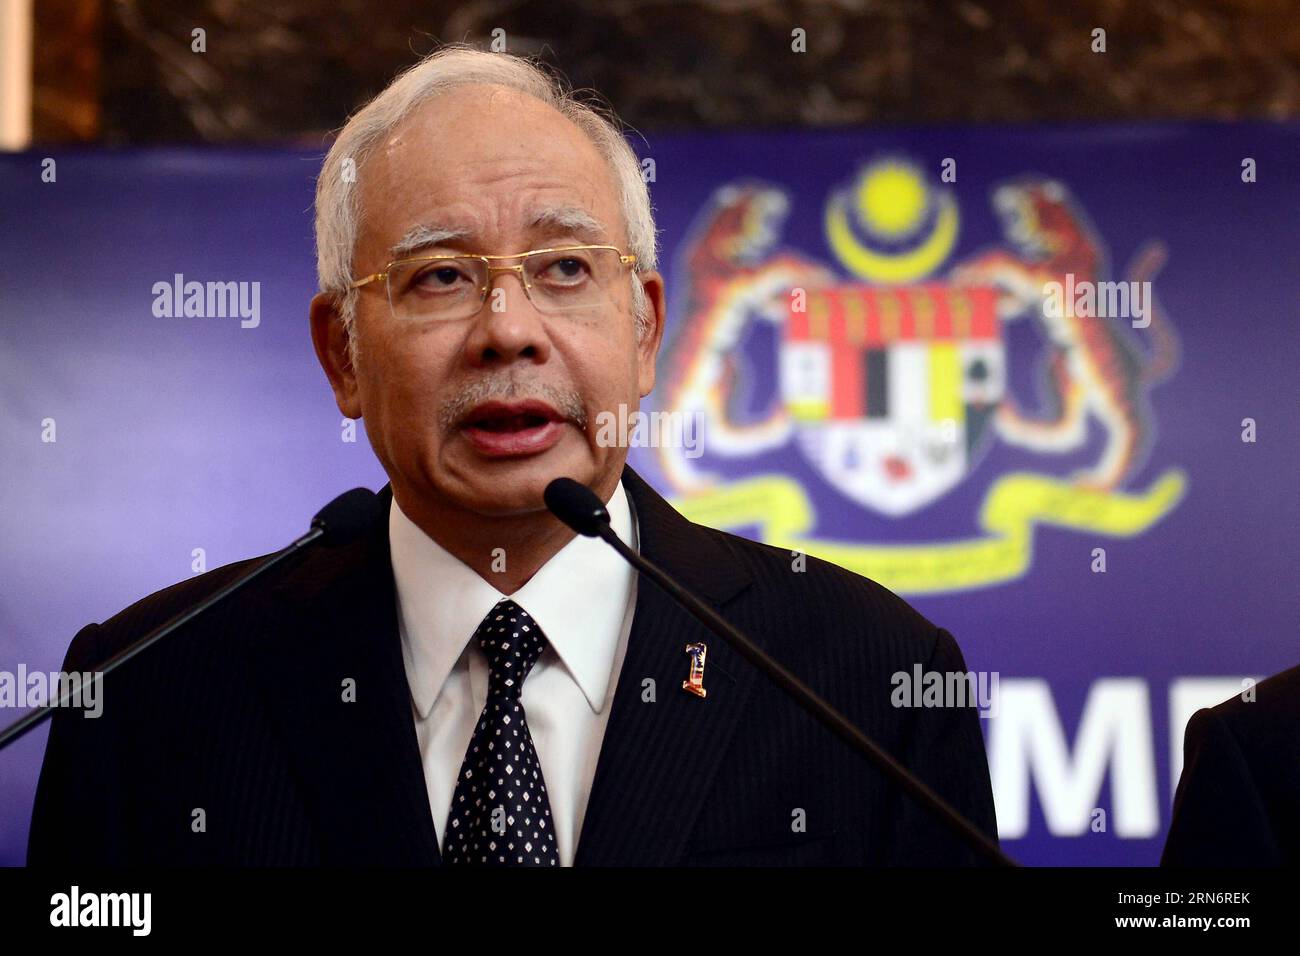 (150806) -- KUALA LUMPUR, Aug. 6, 2015 -- Malaysian Prime Minister Najib Razak attends a press conference on the missing Malaysian Airlines flight MH370 in Kuala Lumpur, Malaysia, Aug. 6, 2015. Verification had confirmed that the debris discovered on the Reunion Island belongs to the missing Malaysian Airlines flight MH370, Malaysian Prime Minister Najib Razak announced here early on Thursday. ) MALAYSIA-KUALA LUMPUR-PM-MH 370 FLIGHT-PRESS CONFERENCE ChongxVoonxChung PUBLICATIONxNOTxINxCHN   Kuala Lumpur Aug 6 2015 Malaysian Prime Ministers Najib Razak Attends a Press Conference ON The Missing Stock Photo